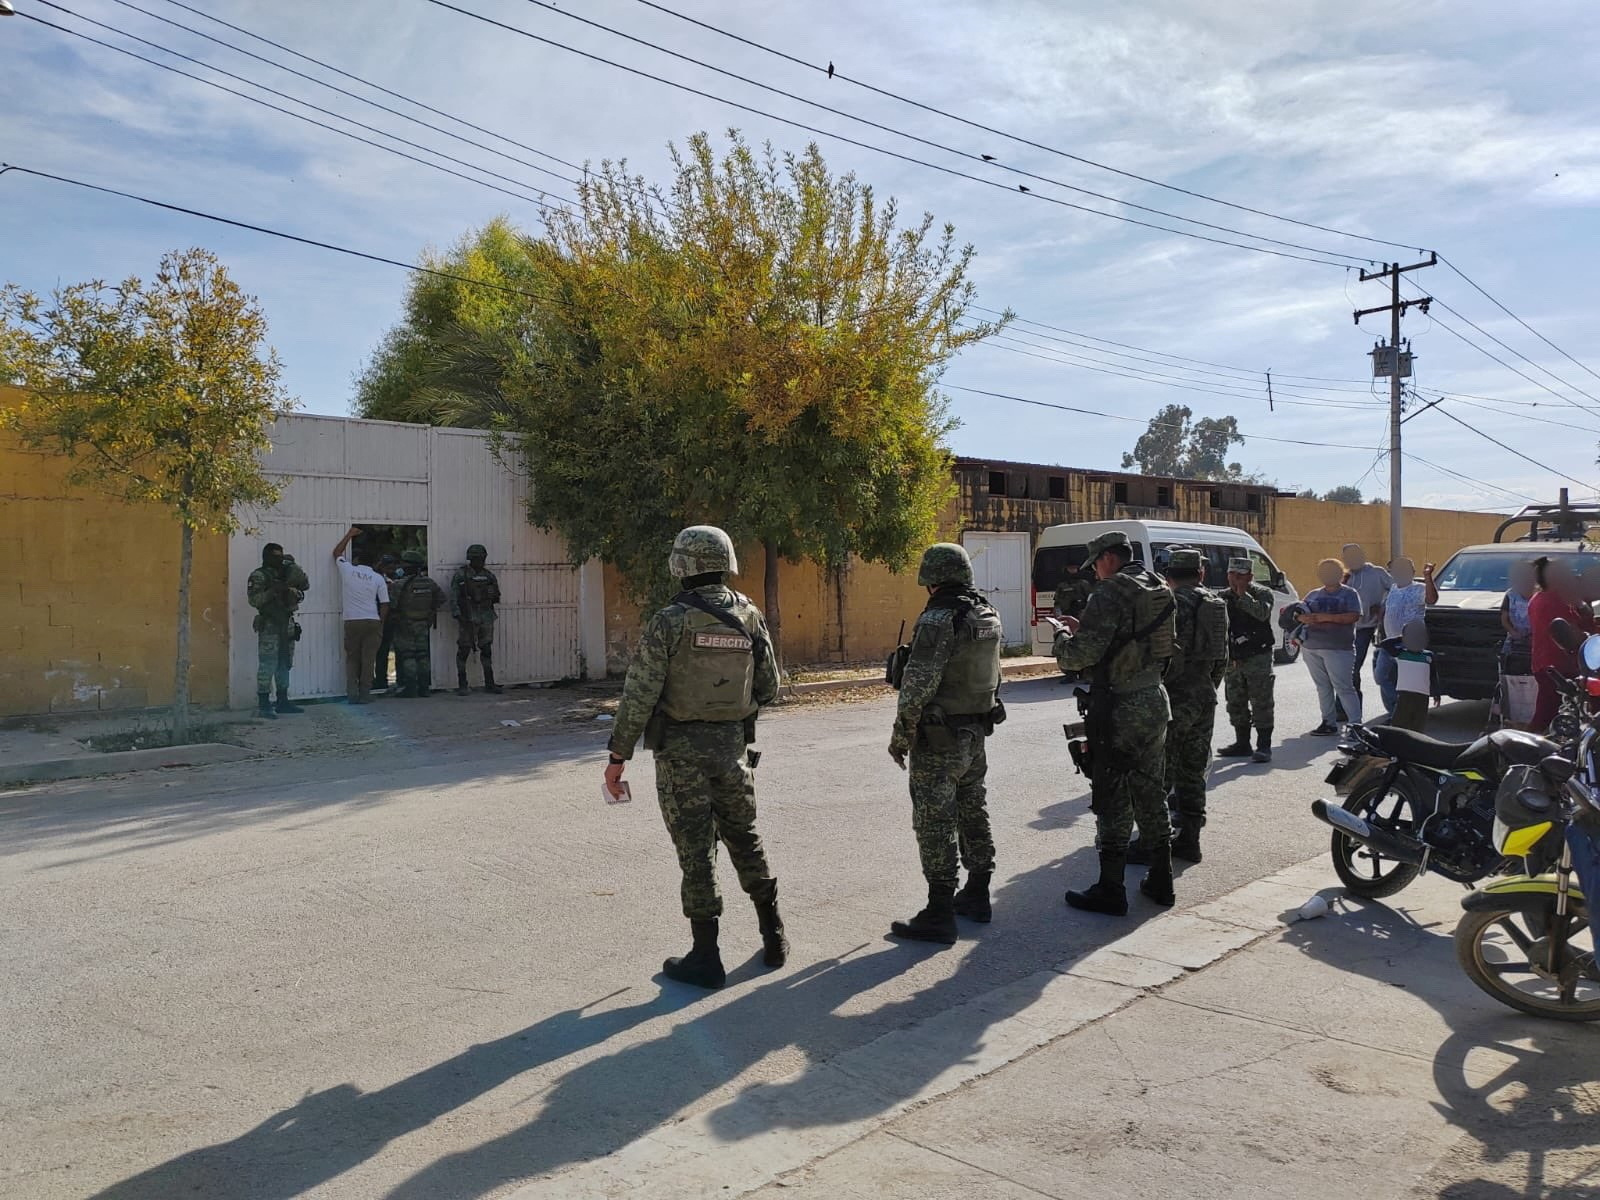 Members of the security forces work on a rescue operation of kidnapped migrants, in Ciudad Lerdo